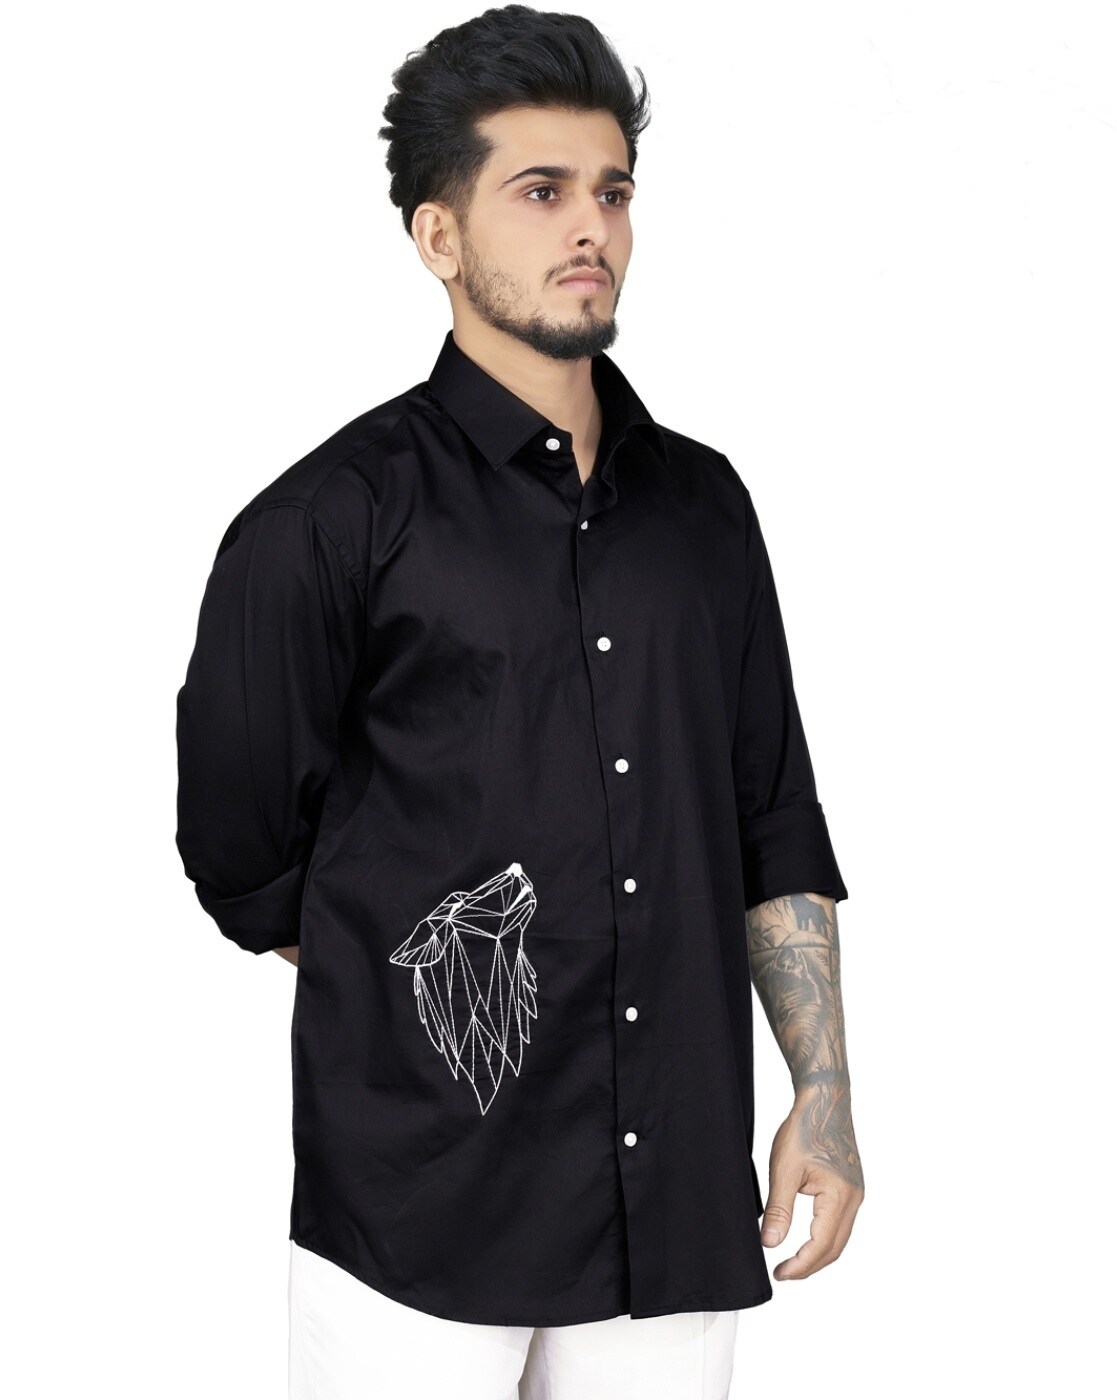 Buy Black Shirts for Men by FRENCH CROWN Online